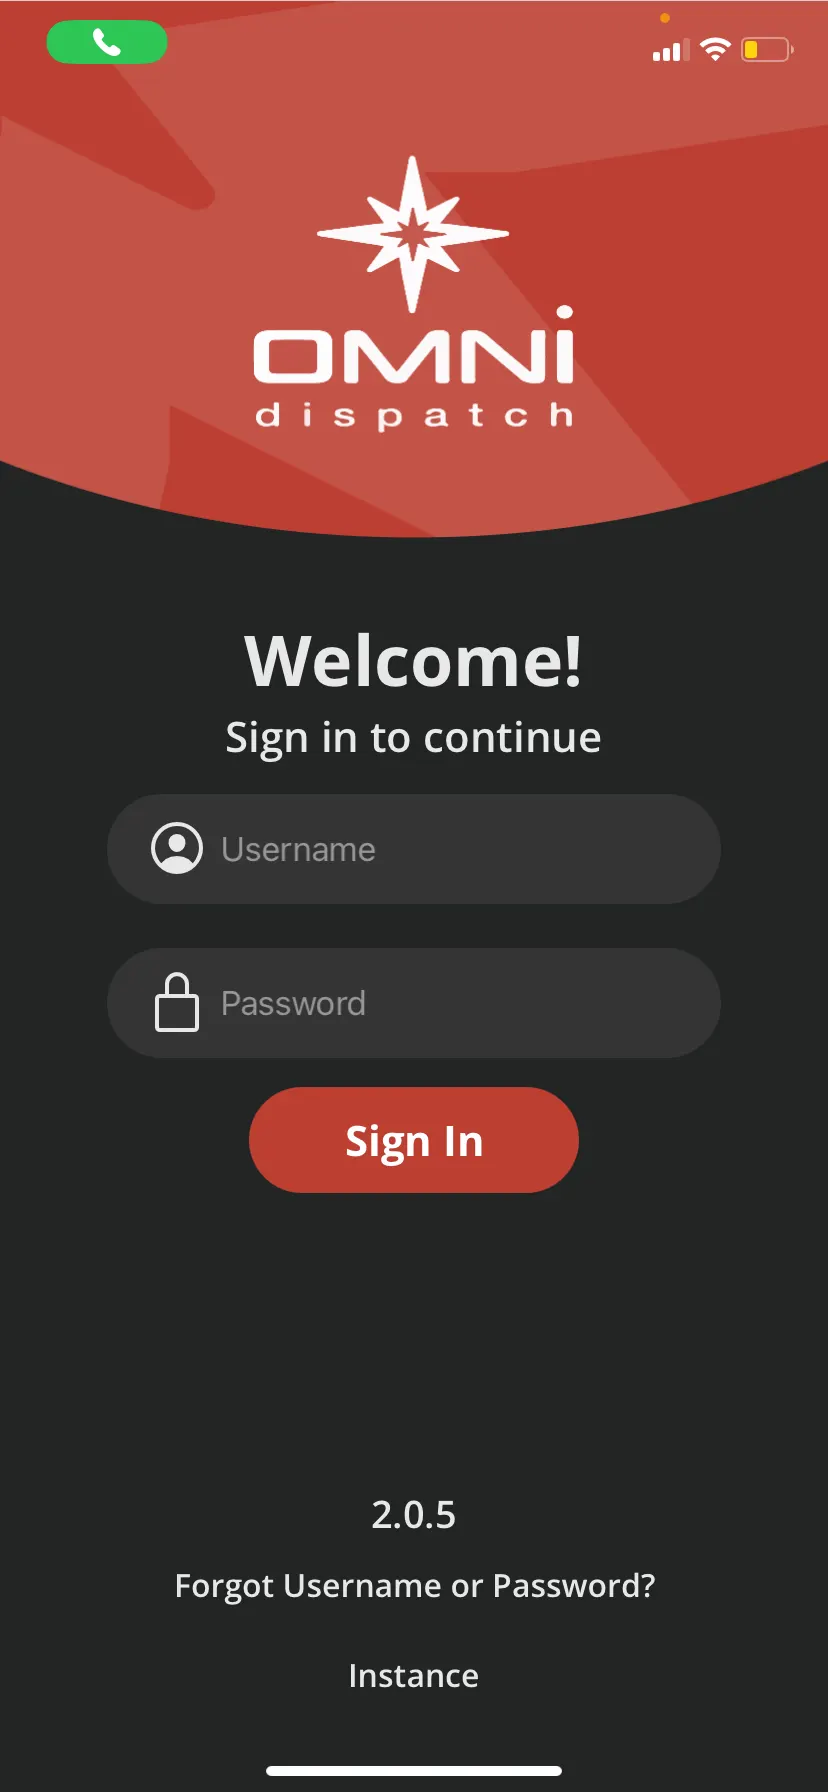 Enter your username and password as set up with your Supplier. Select Sign In.